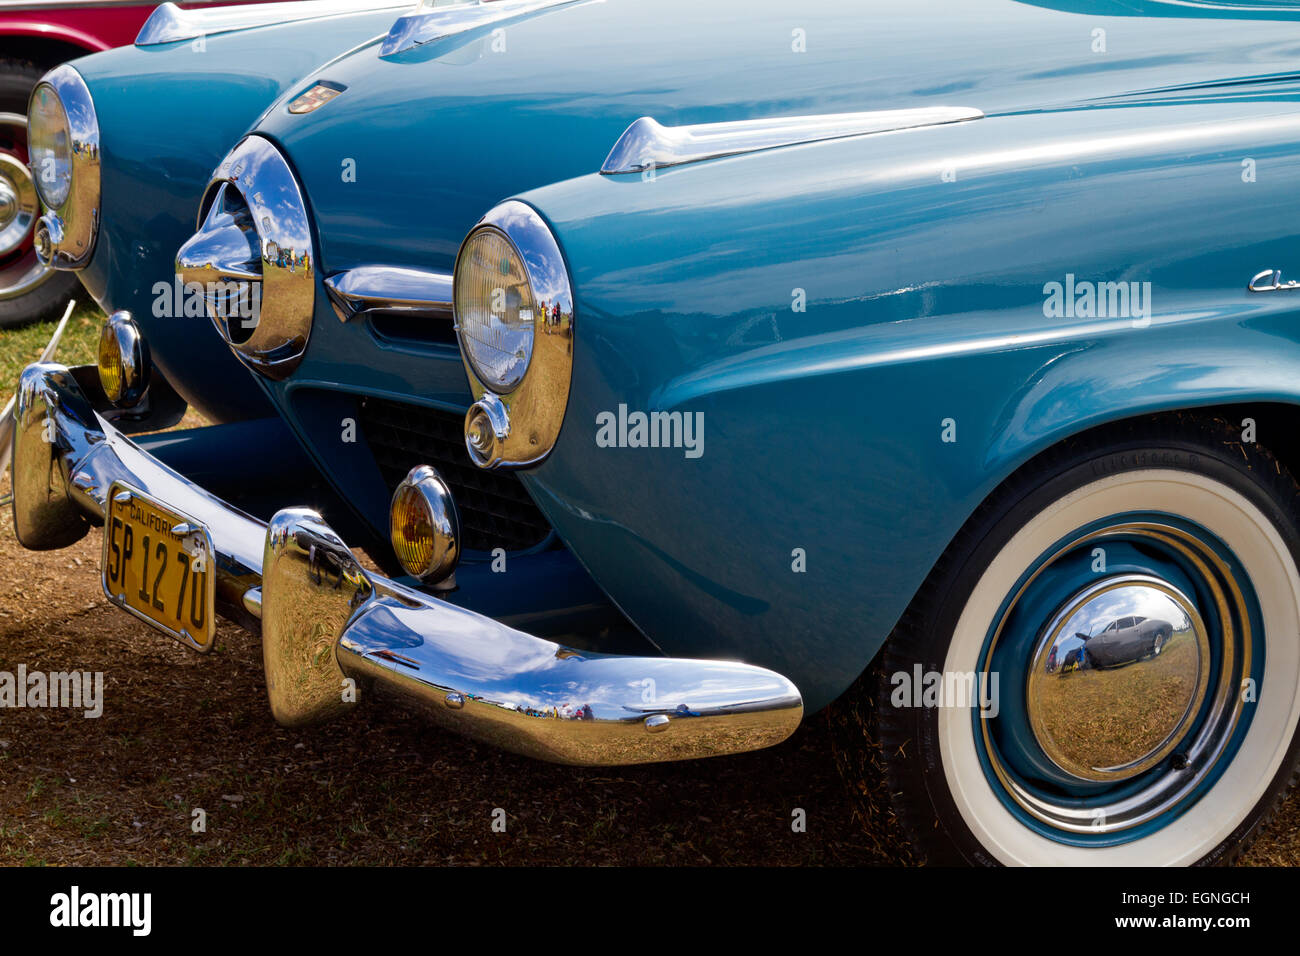 Beautifully restored classic 1950 Studebaker displayed at an auto show. Stock Photo